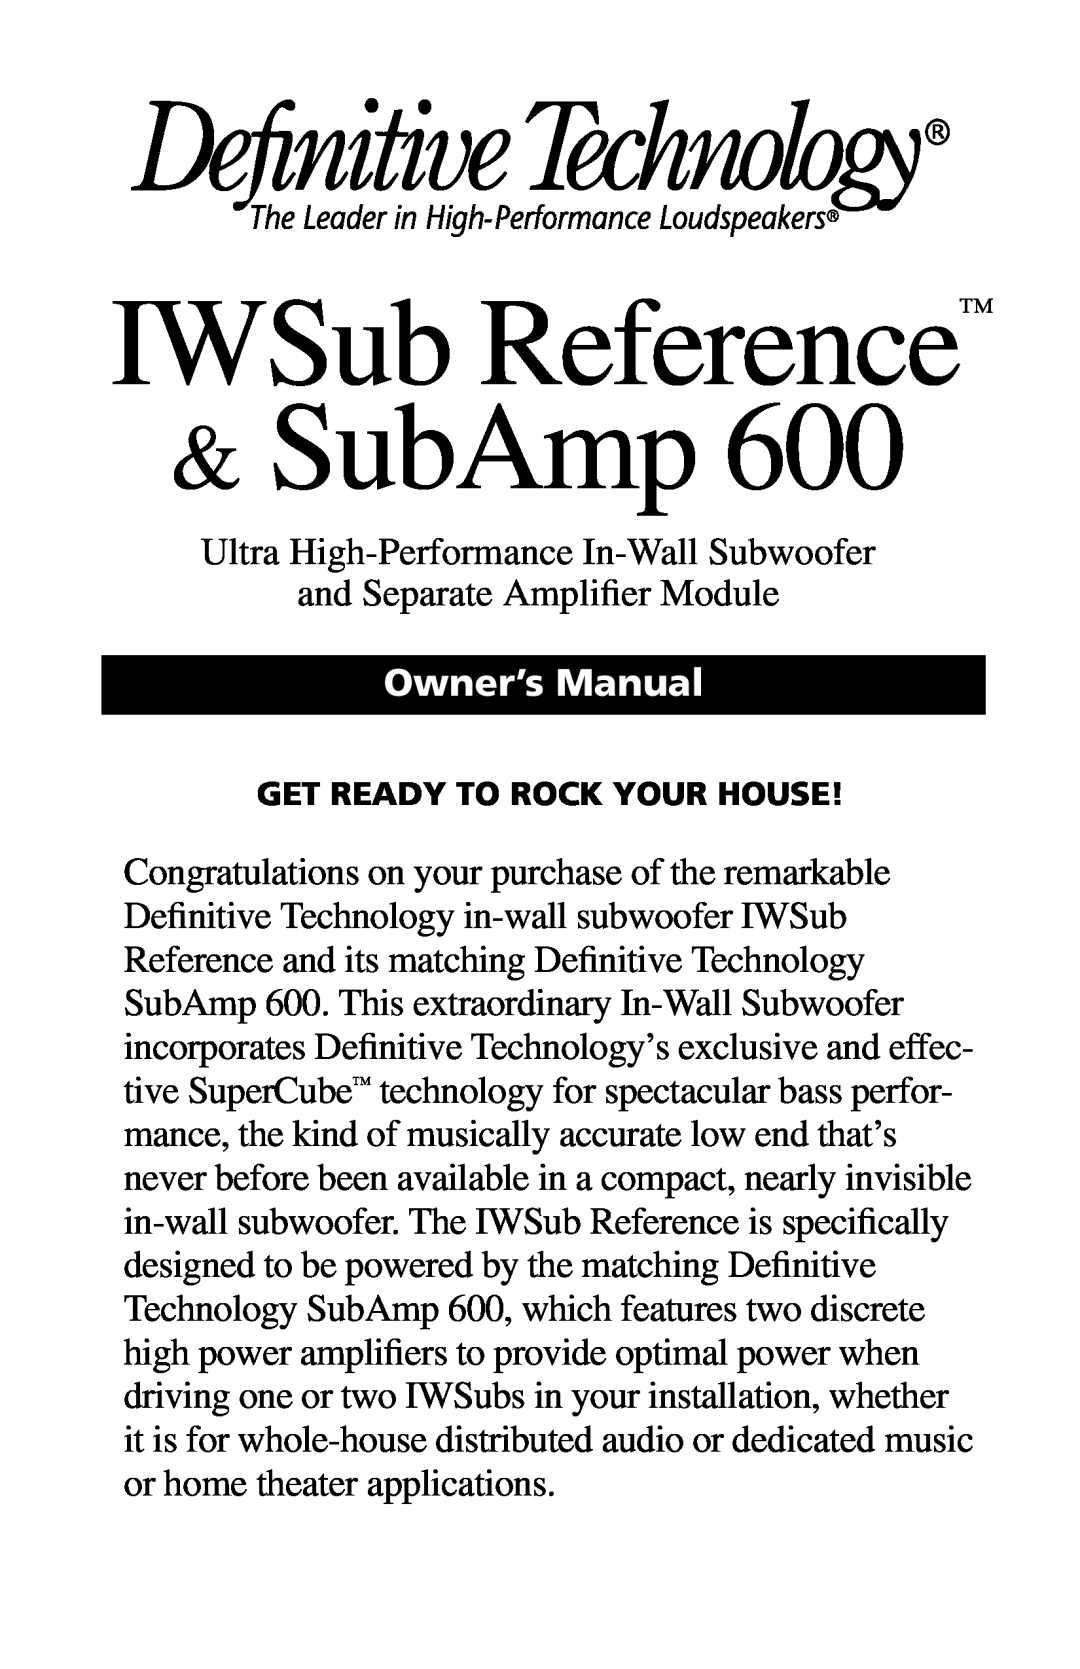 Definitive Technology 600 owner manual IWSub Reference SubAmp, Owner’s Manual 